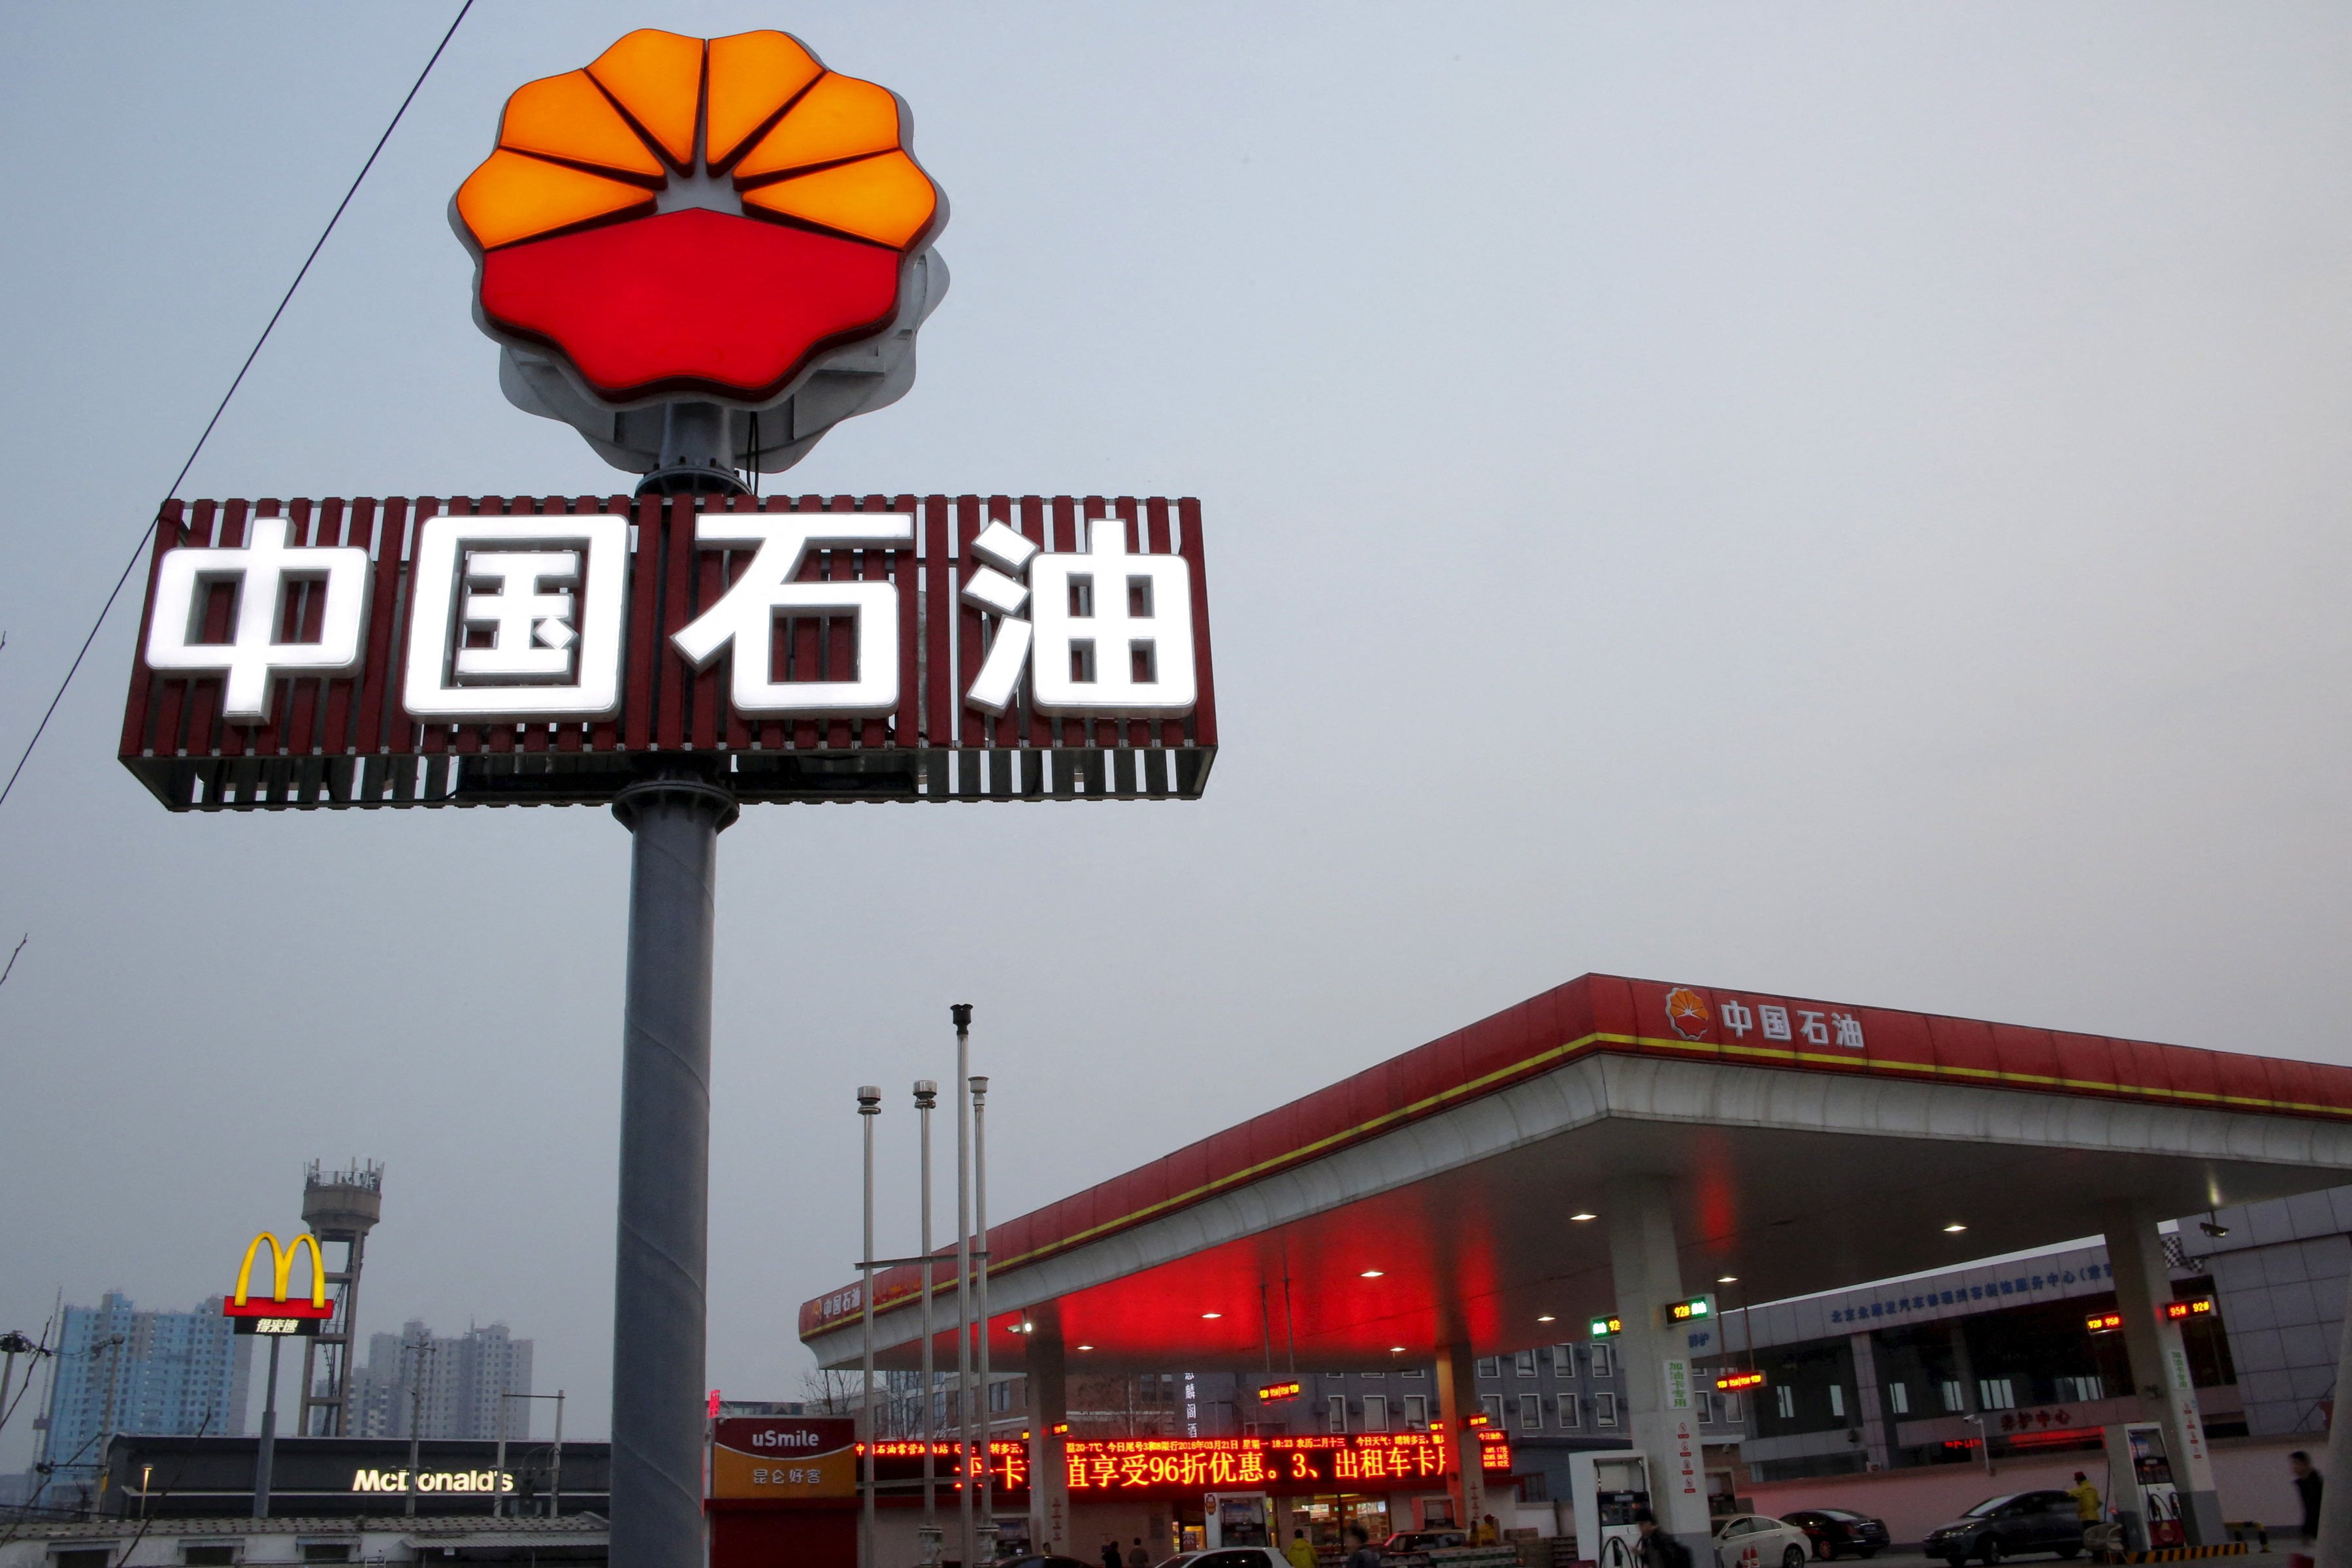 Firms like PetroChina have signed long-term contracts with Shell to buy ‘carbon neutral’ LNG, which uses ‘forest offsets’ to balance out carbon emissions. Photo: Reuters